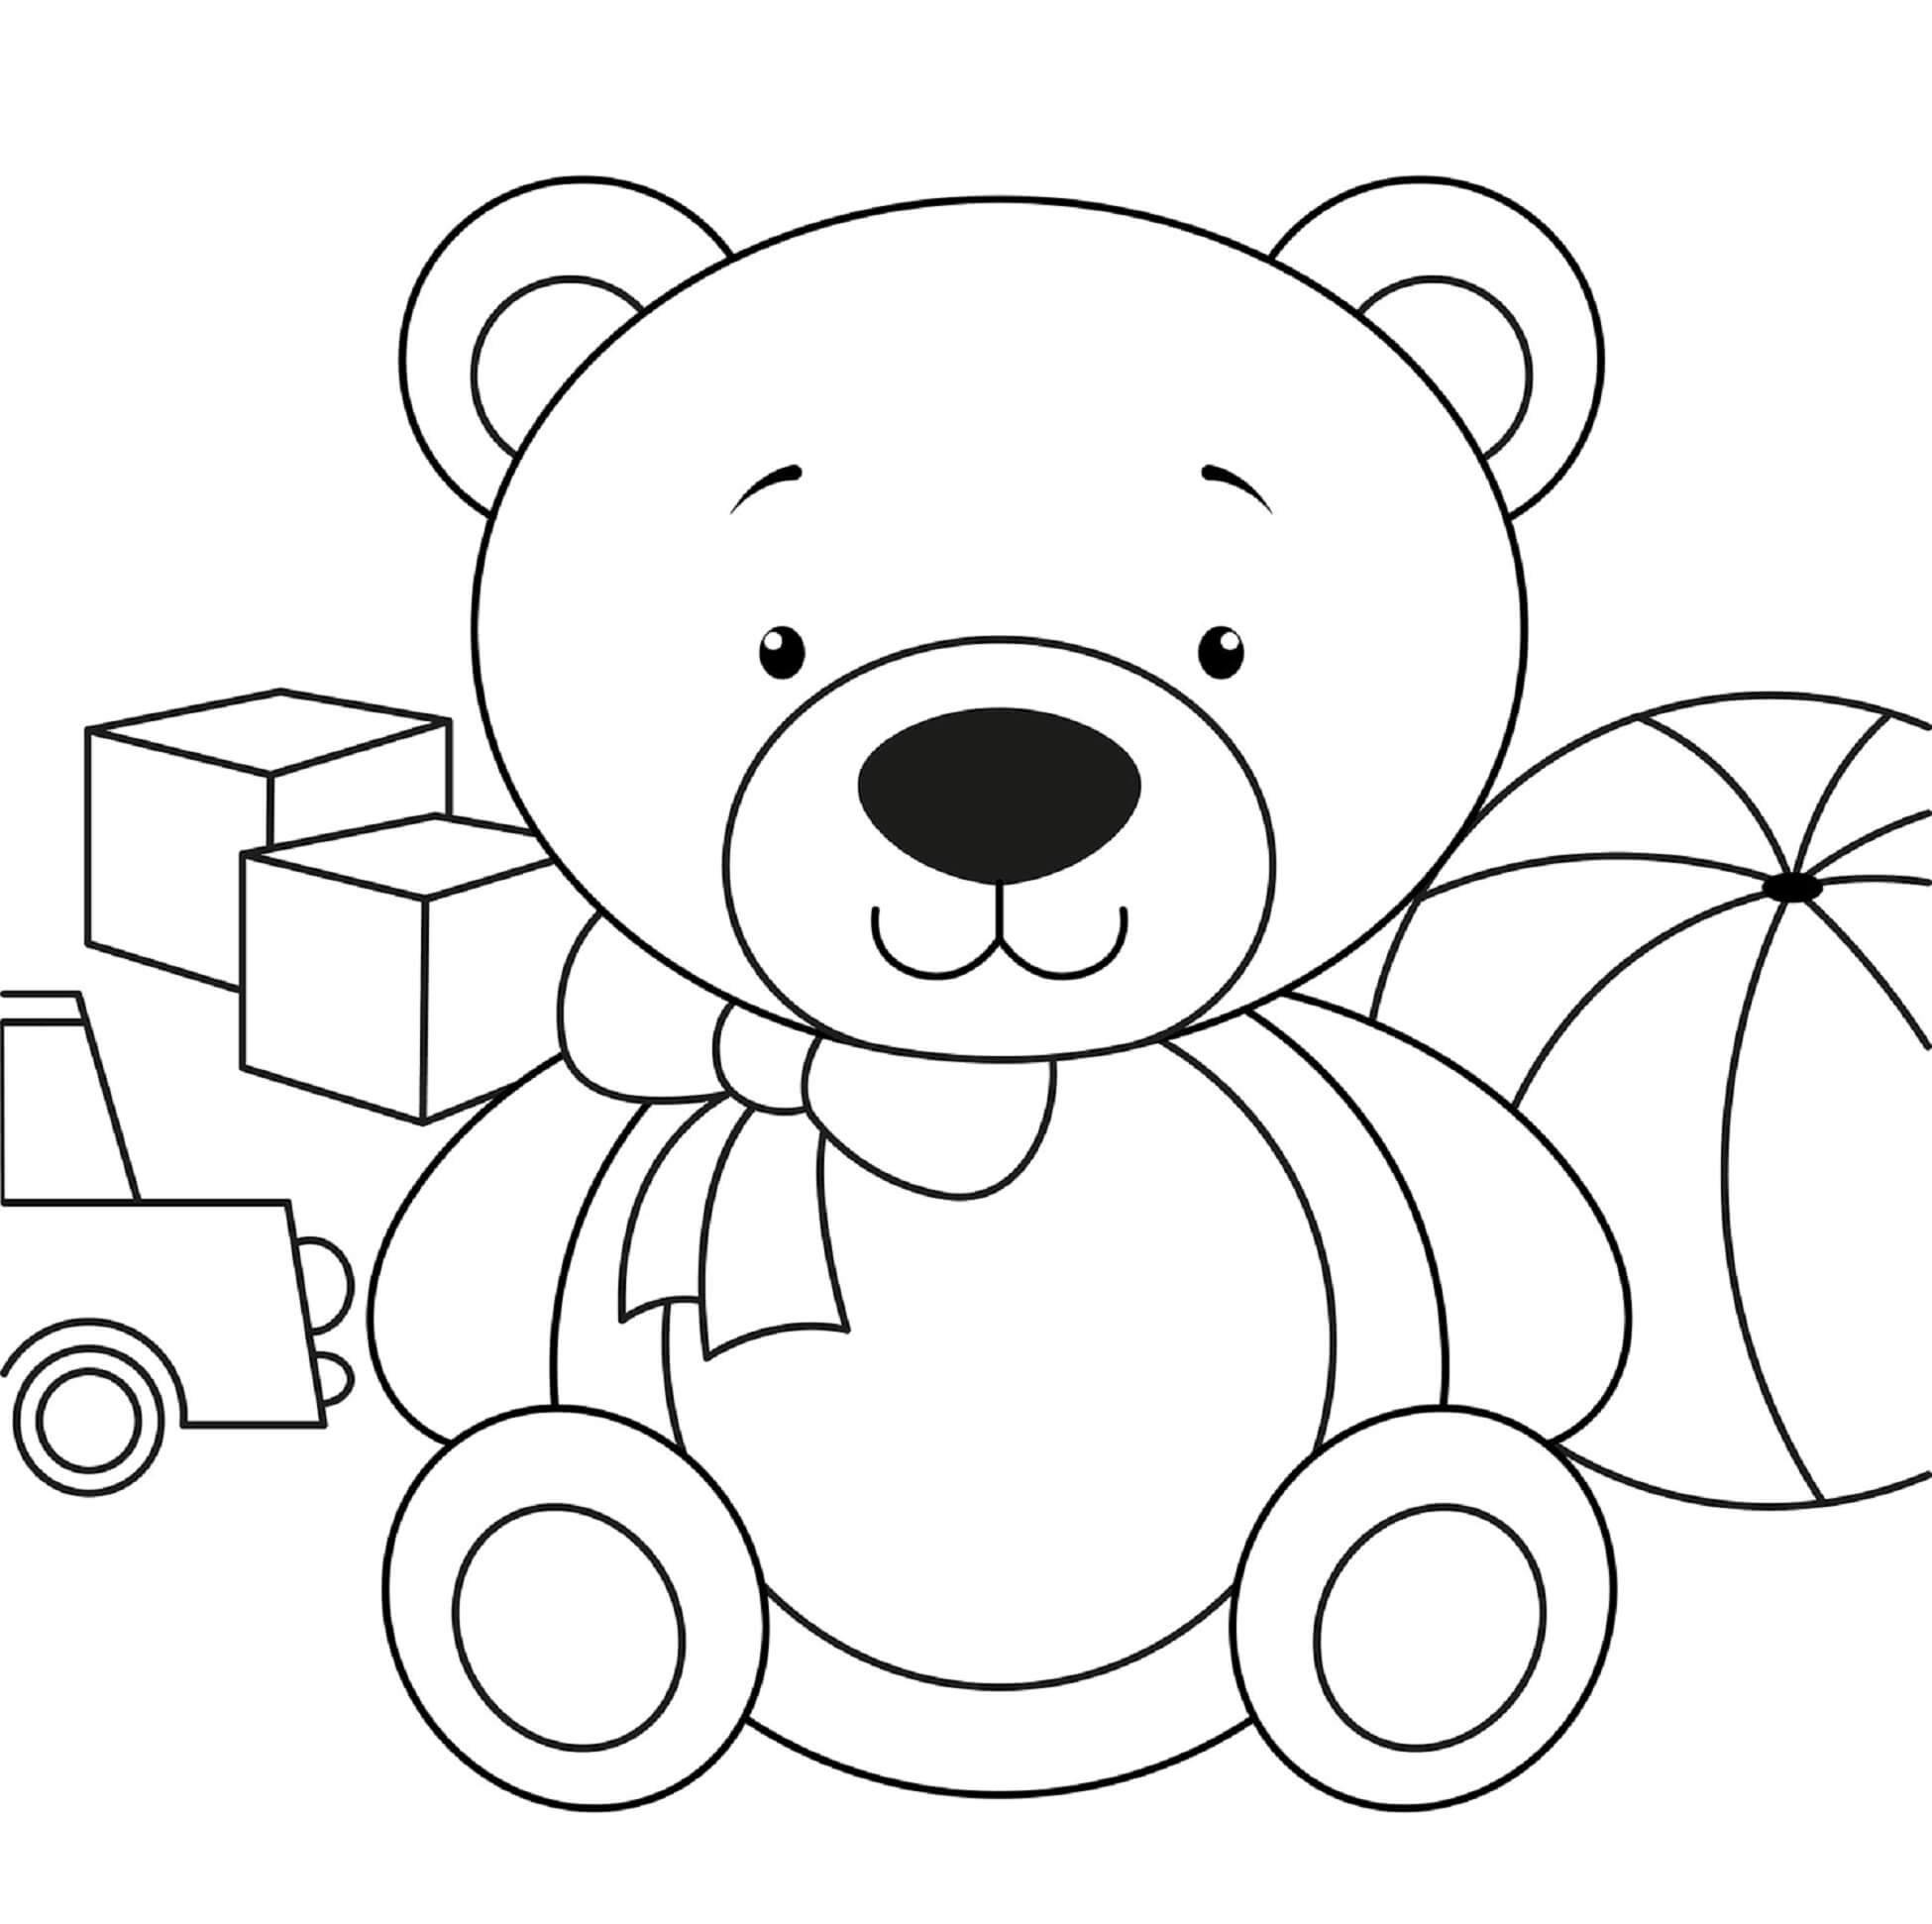 Teddy bear with toys coloring page